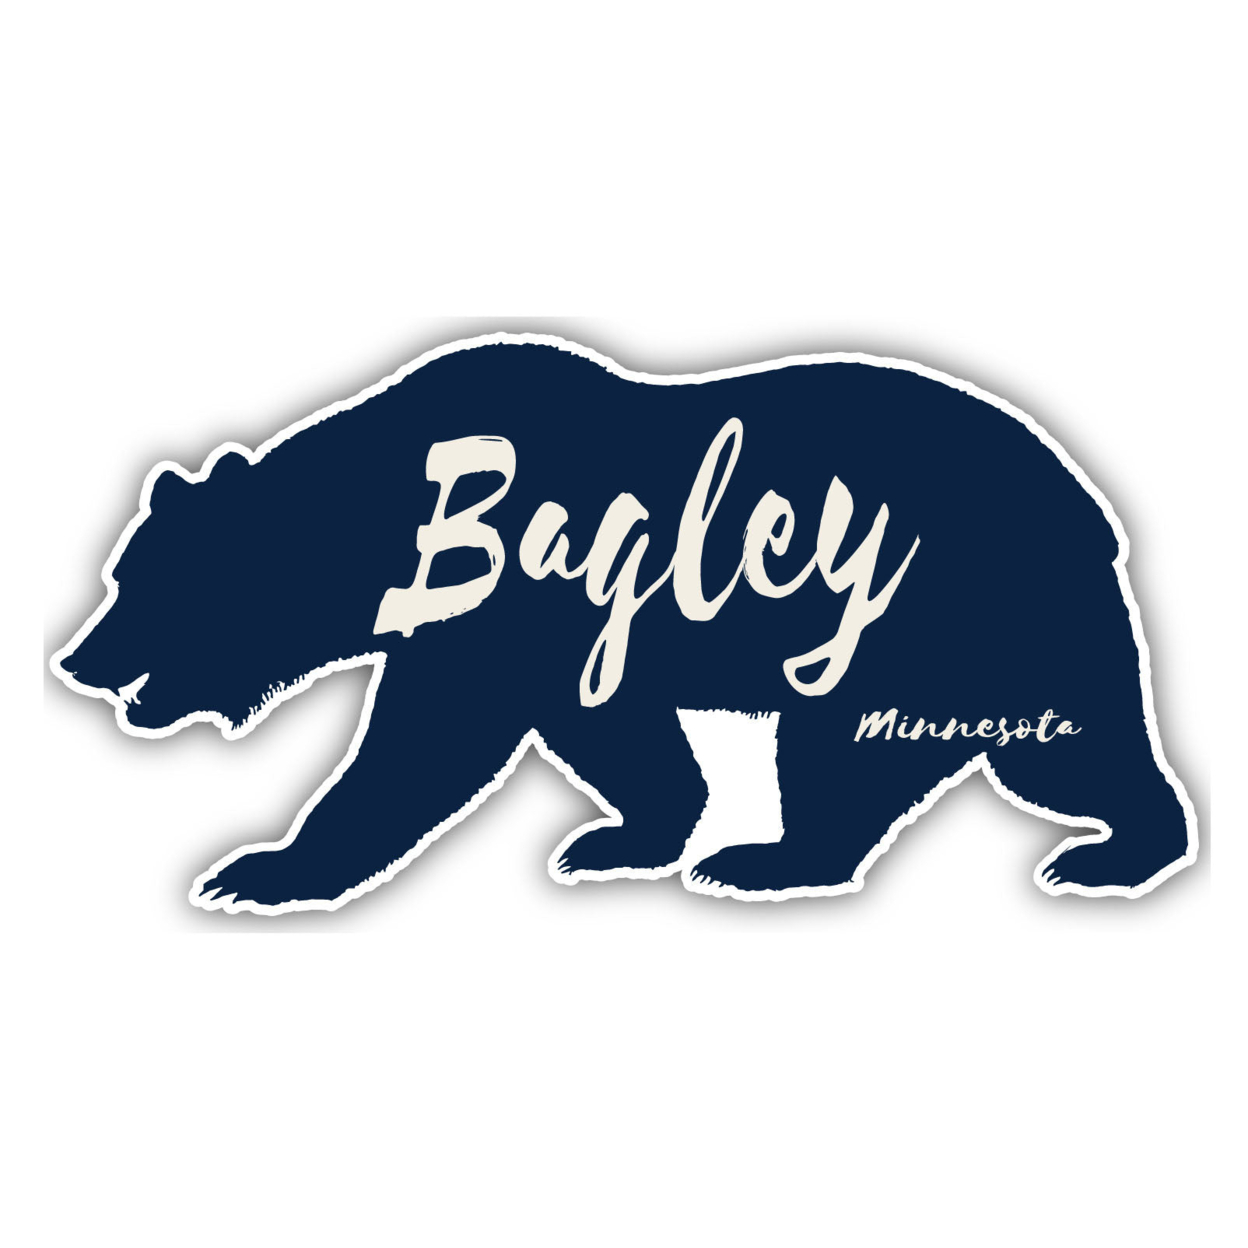 Bagley Minnesota Souvenir Decorative Stickers (Choose Theme And Size) - 4-Pack, 2-Inch, Bear